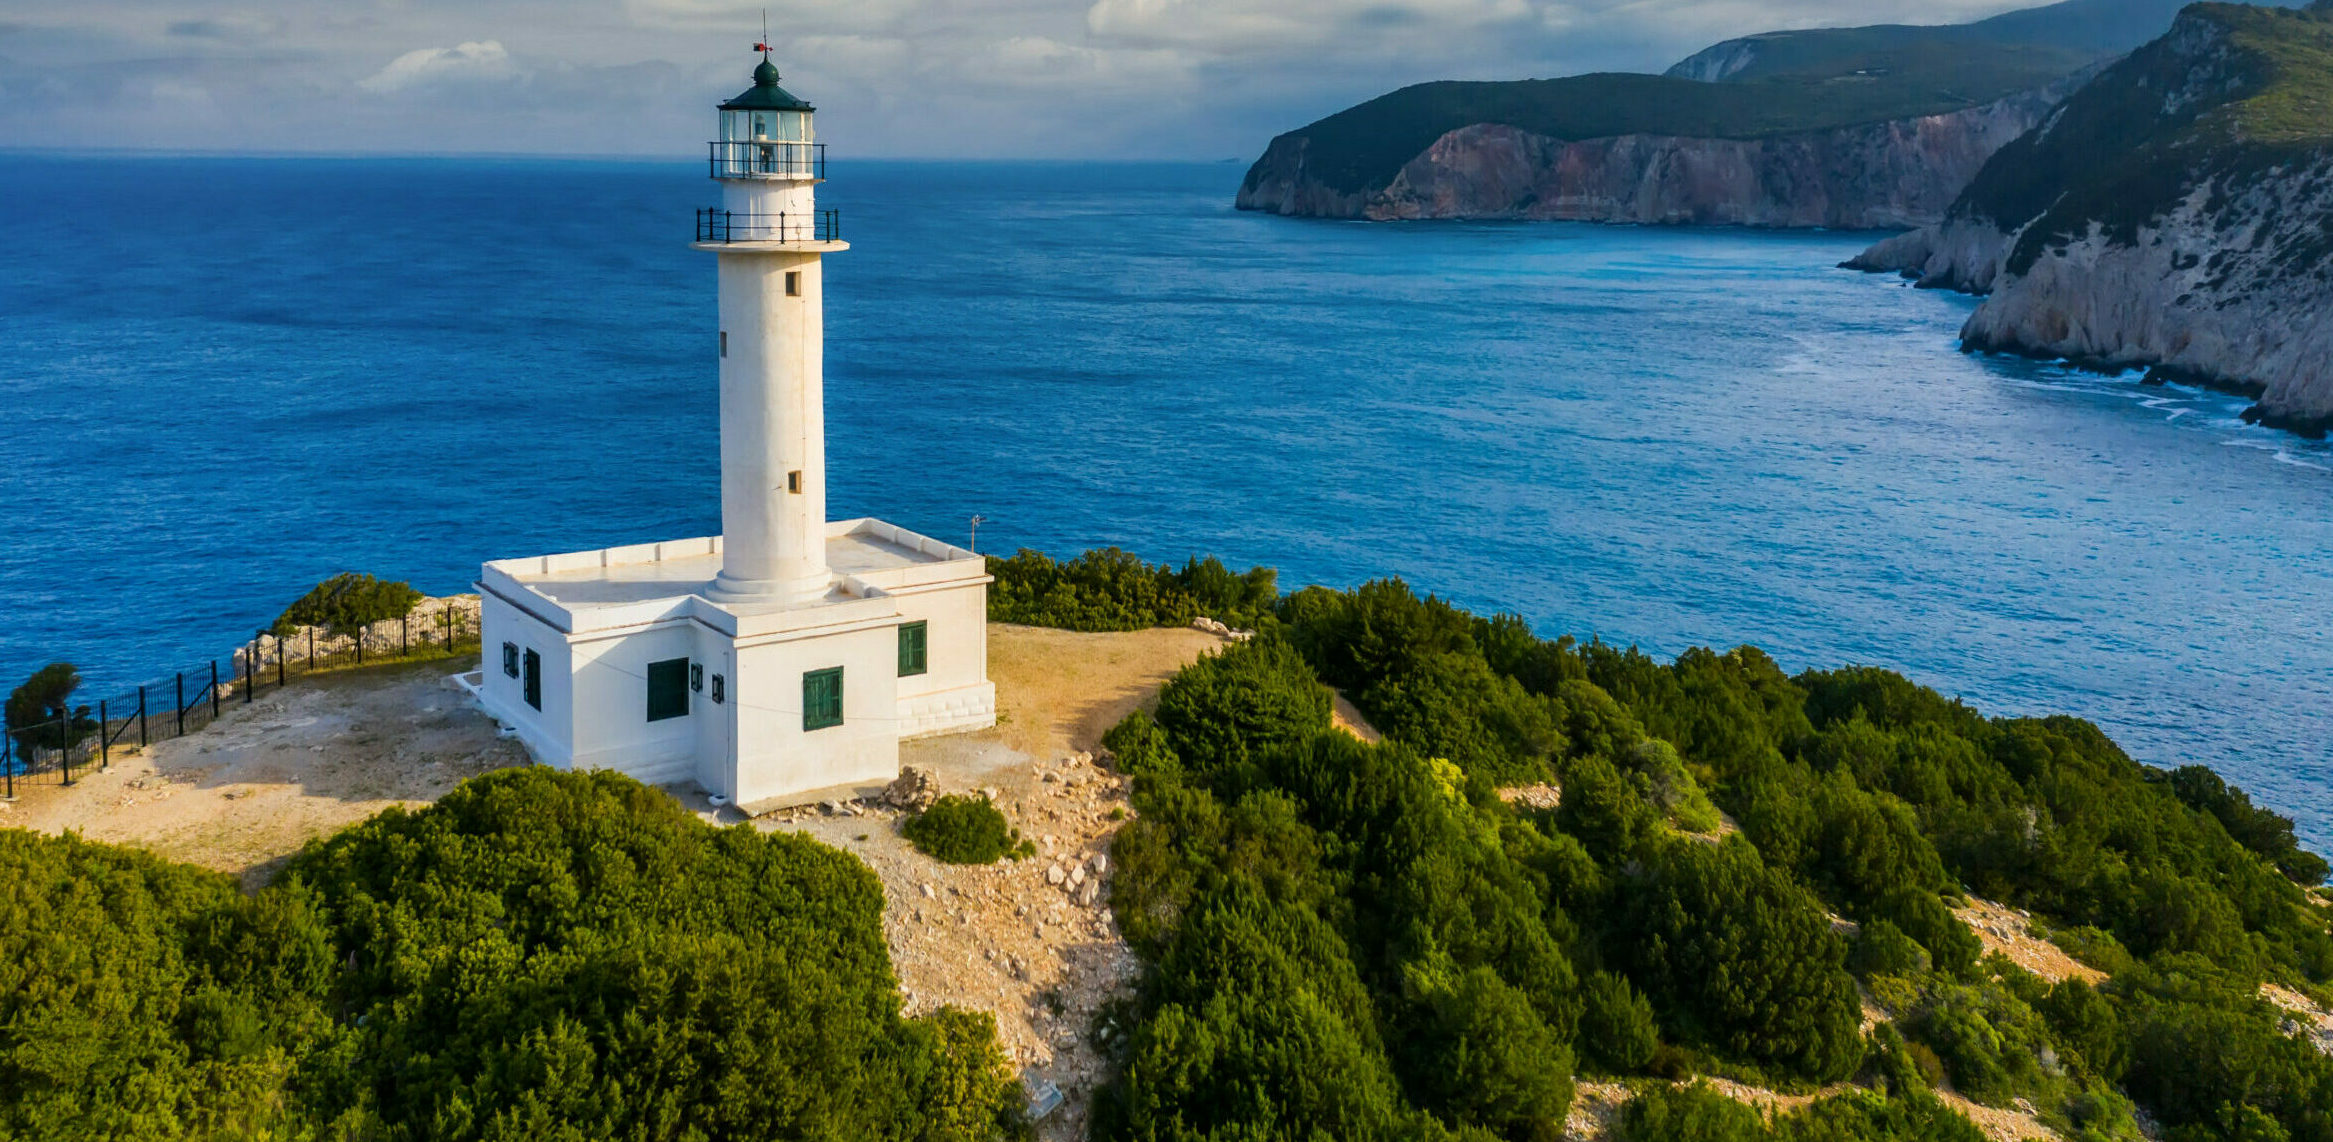 The impressive lighthouses of Greece and their history